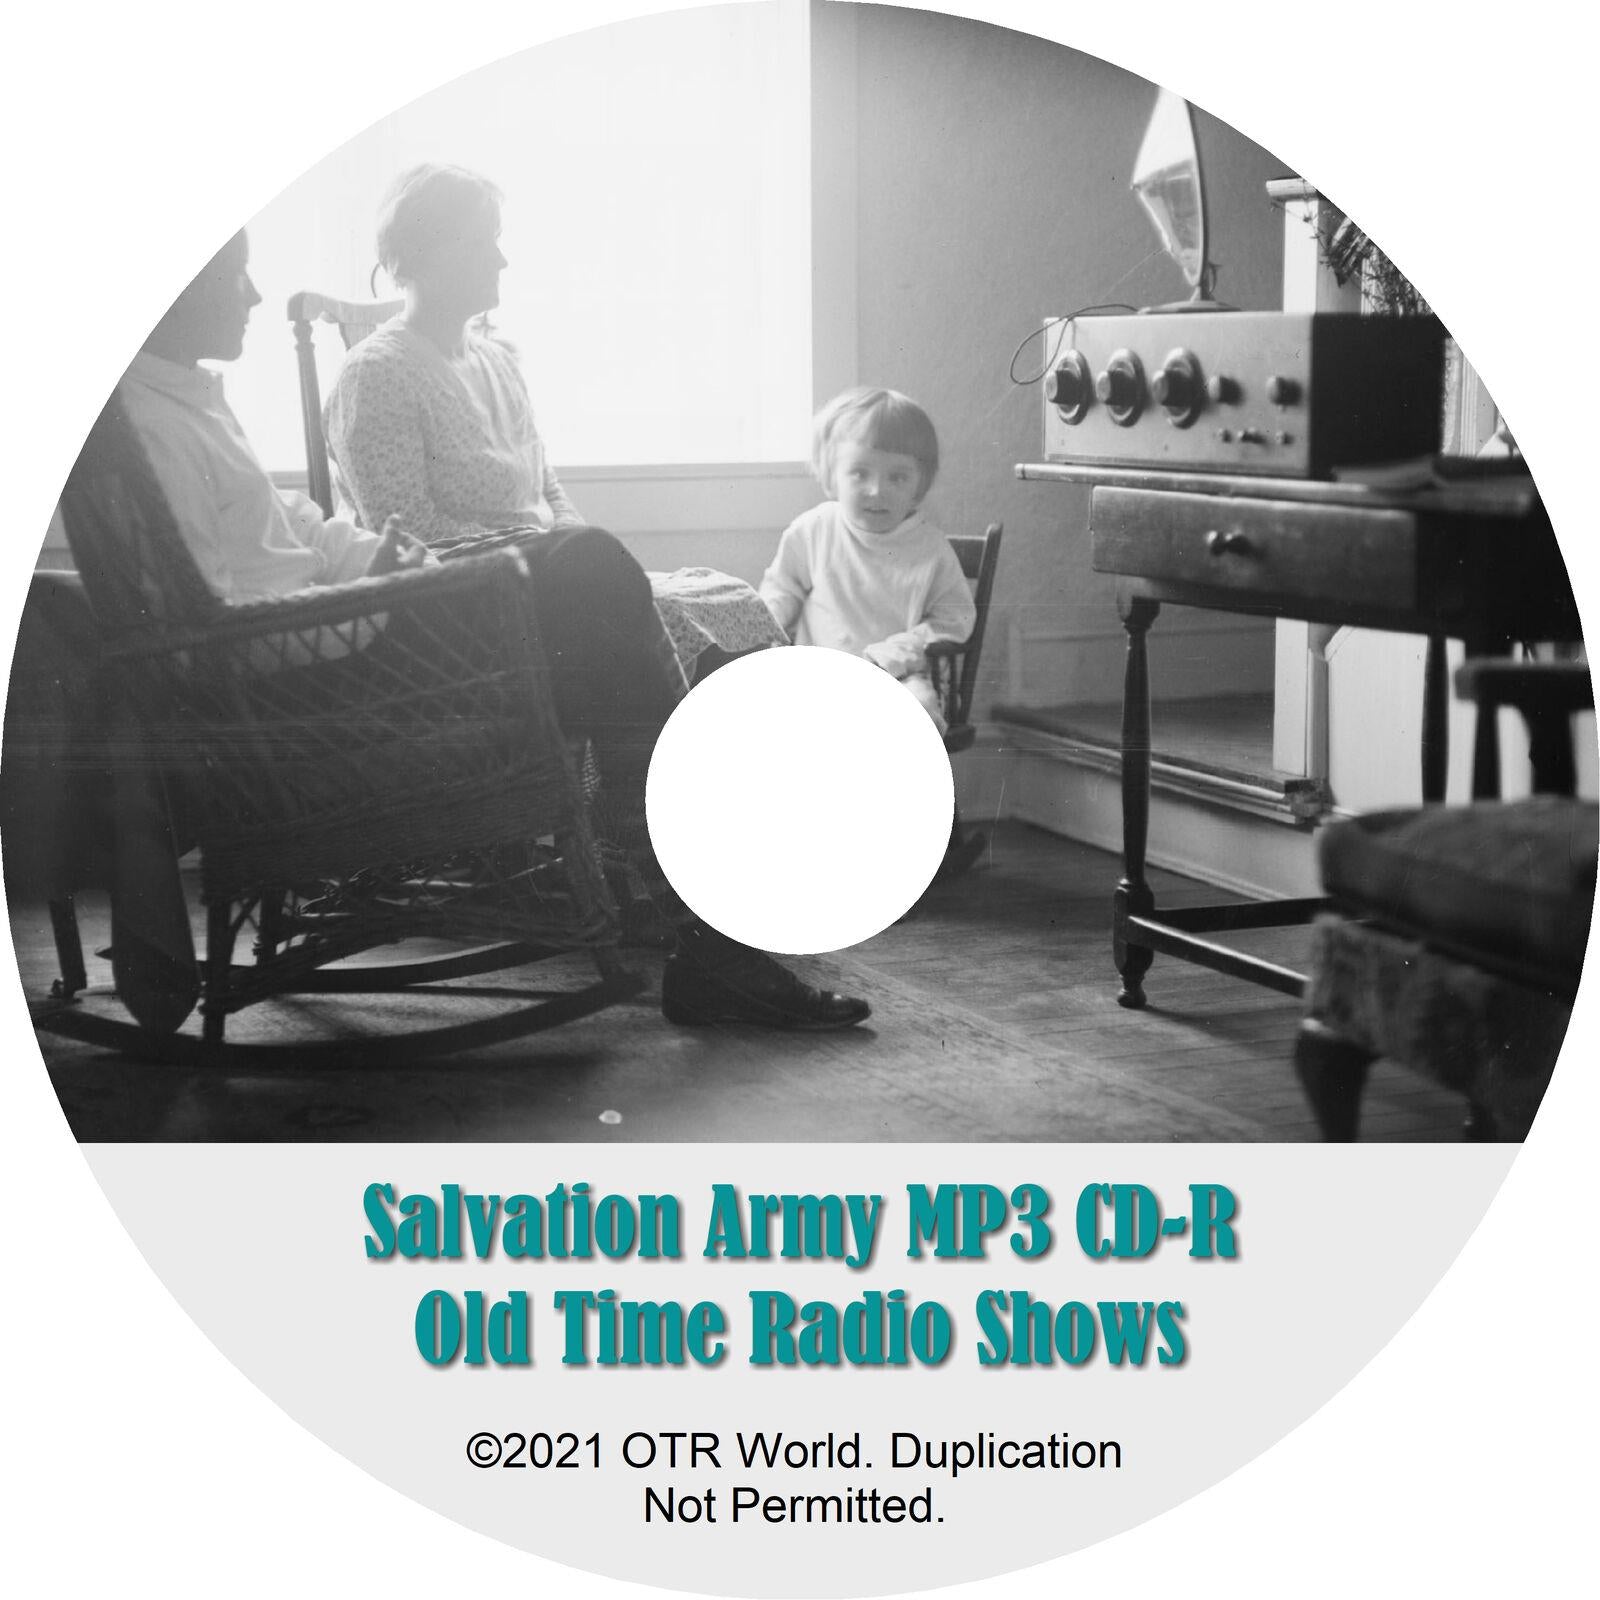 Salvation Army OTR OTRS Old Time Radio Shows MP3 On CD-R 2 Episodes